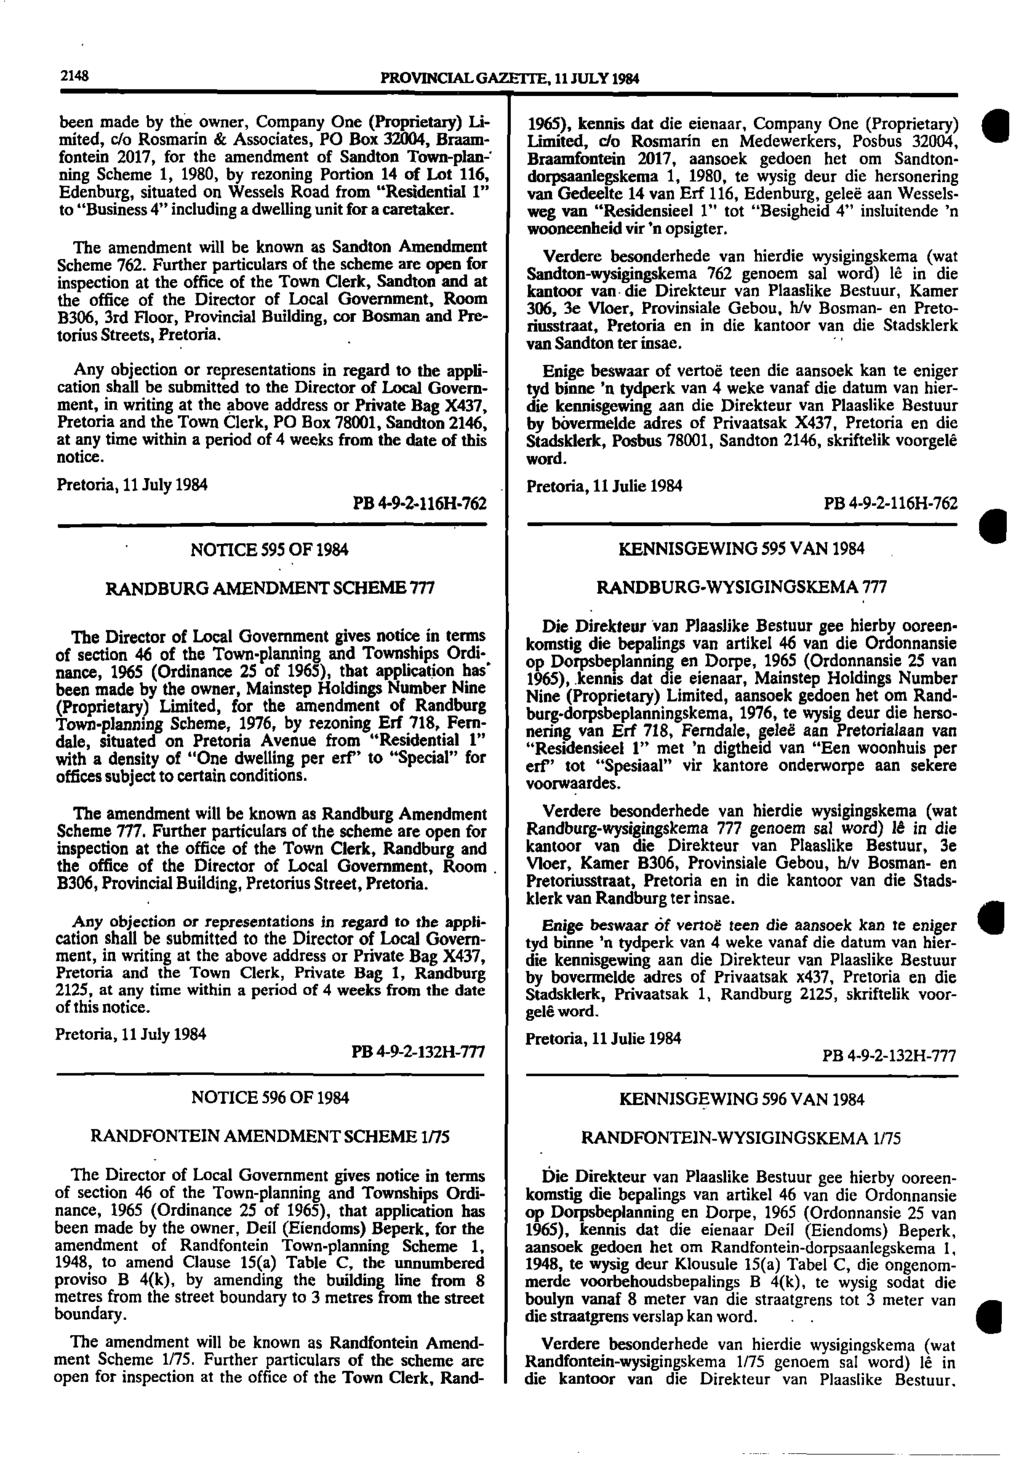 2148 PROVINCIAL GAZETTE 11 JULY 1984 been made by the owner Company One (Proprietary) Li 1965) kennis dat die eienaar Company One (Proprietary) Ill mited do Rosmarin & Associates PO Box 32004 Braam